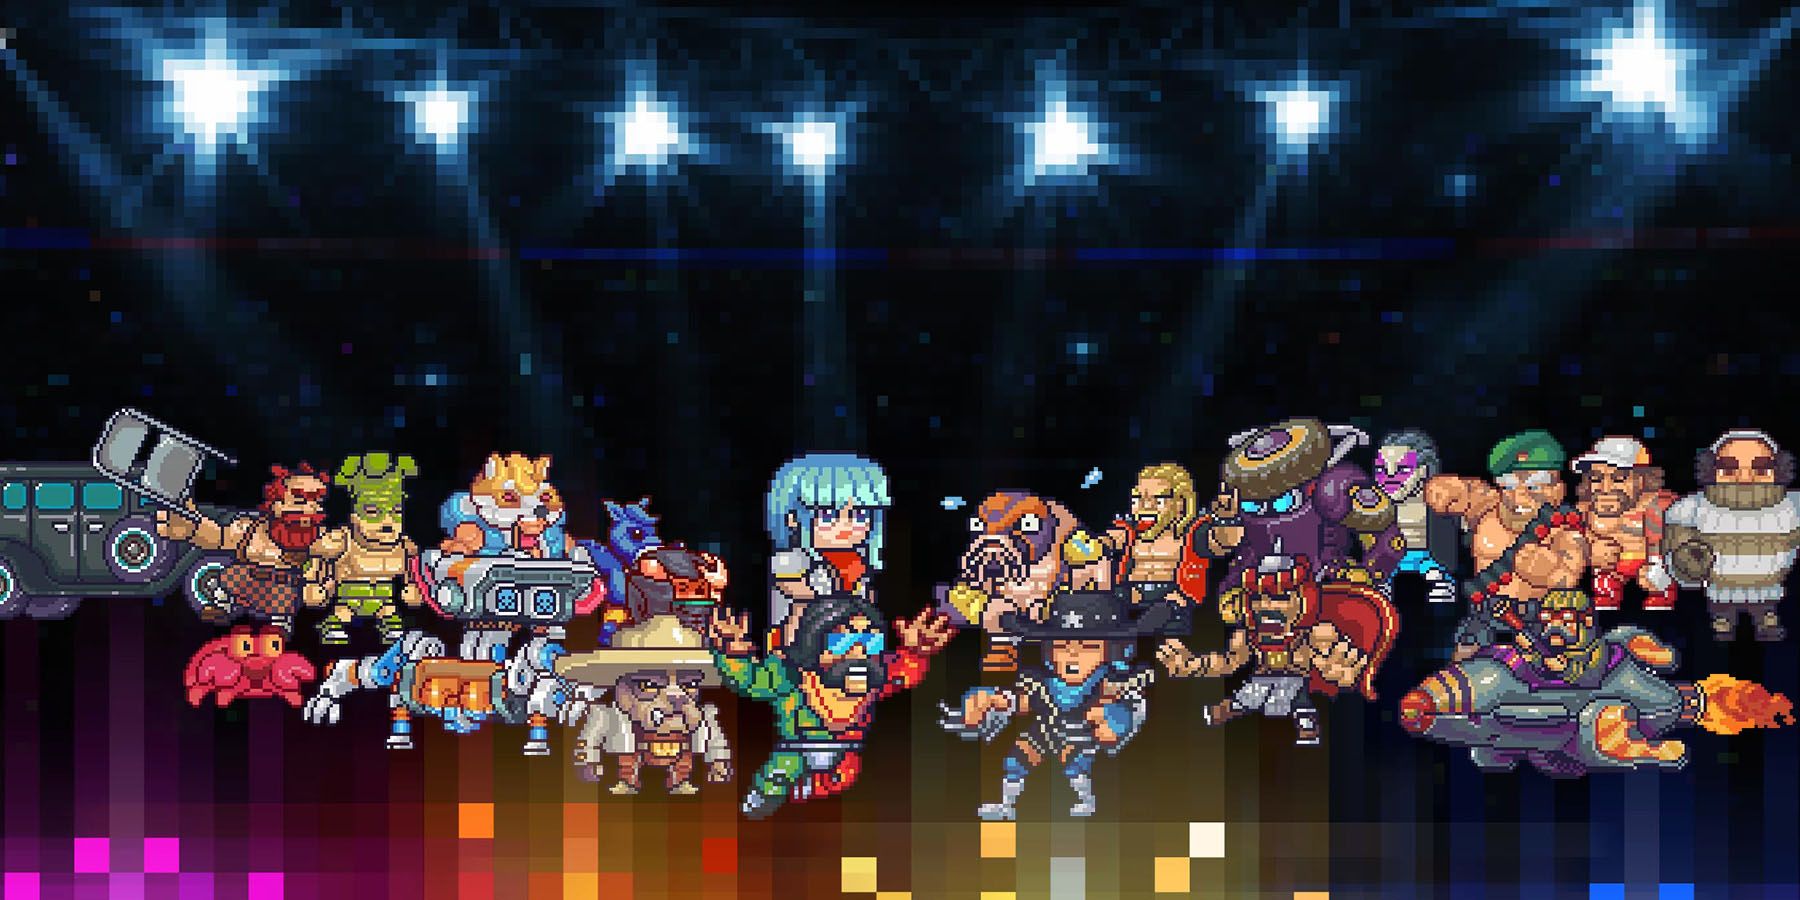 A screenshot of various characters WrestleQuest getting ready to battle each other amid a dark background.